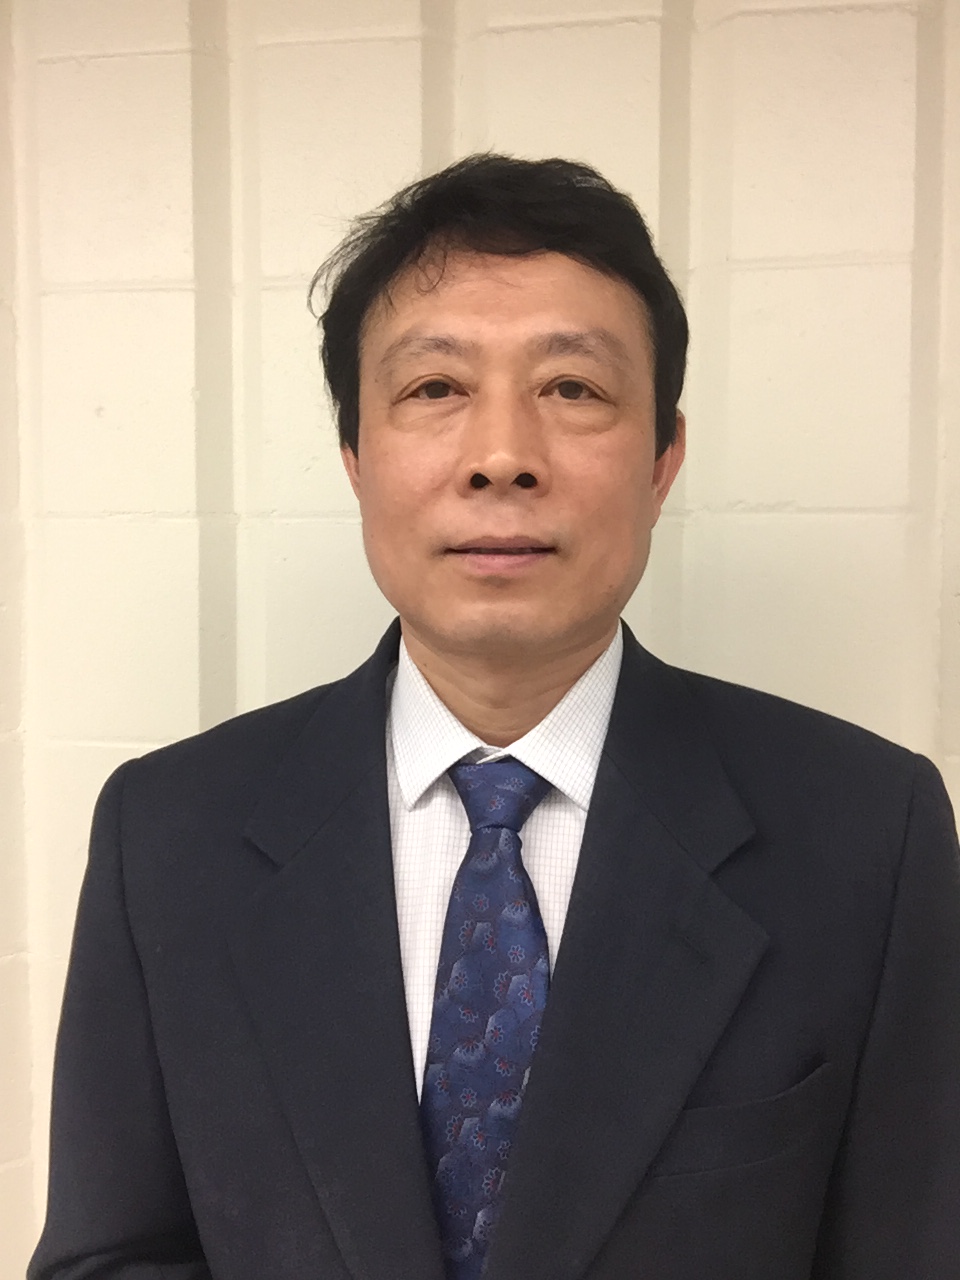 Head Shot of Dr. Wilson Wang, Lakehead University Research Chair in Intelligent Systems